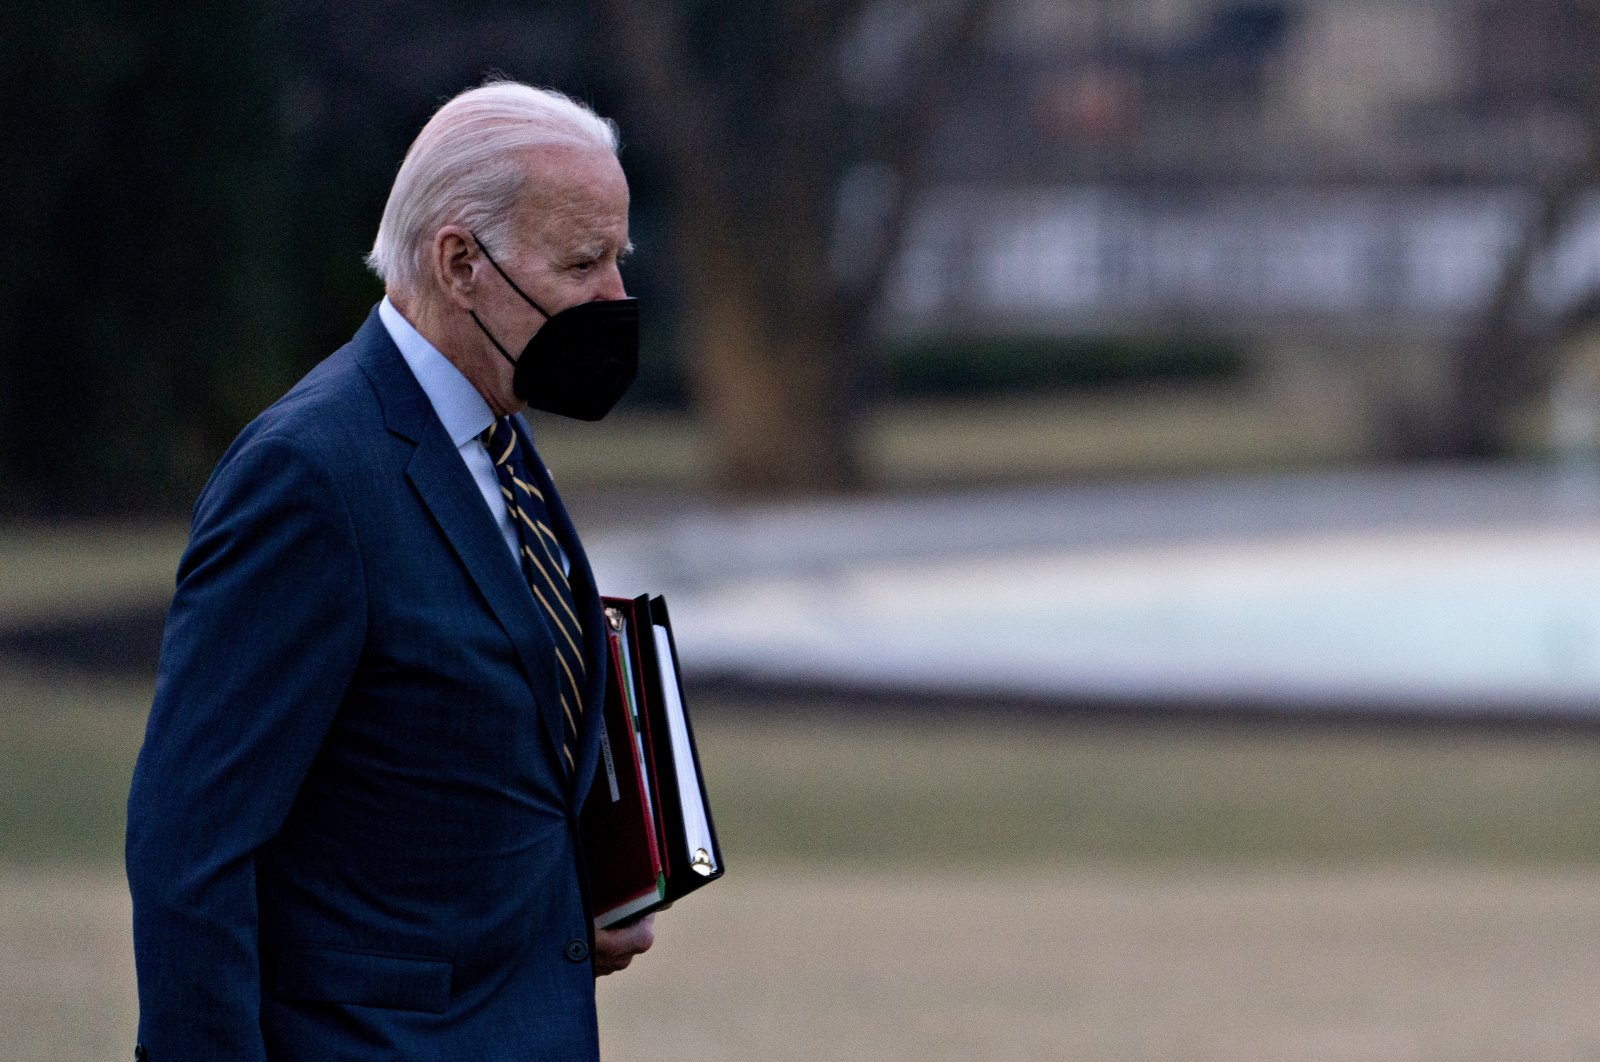 U.S. President Joe Biden walks on the South Lawn of the White House following an arrival on Marine One after accompanying First Lady Jill Biden to Walter Reed National Military Medical Center in Washington, D.C., on Jan. 11, 2023. 